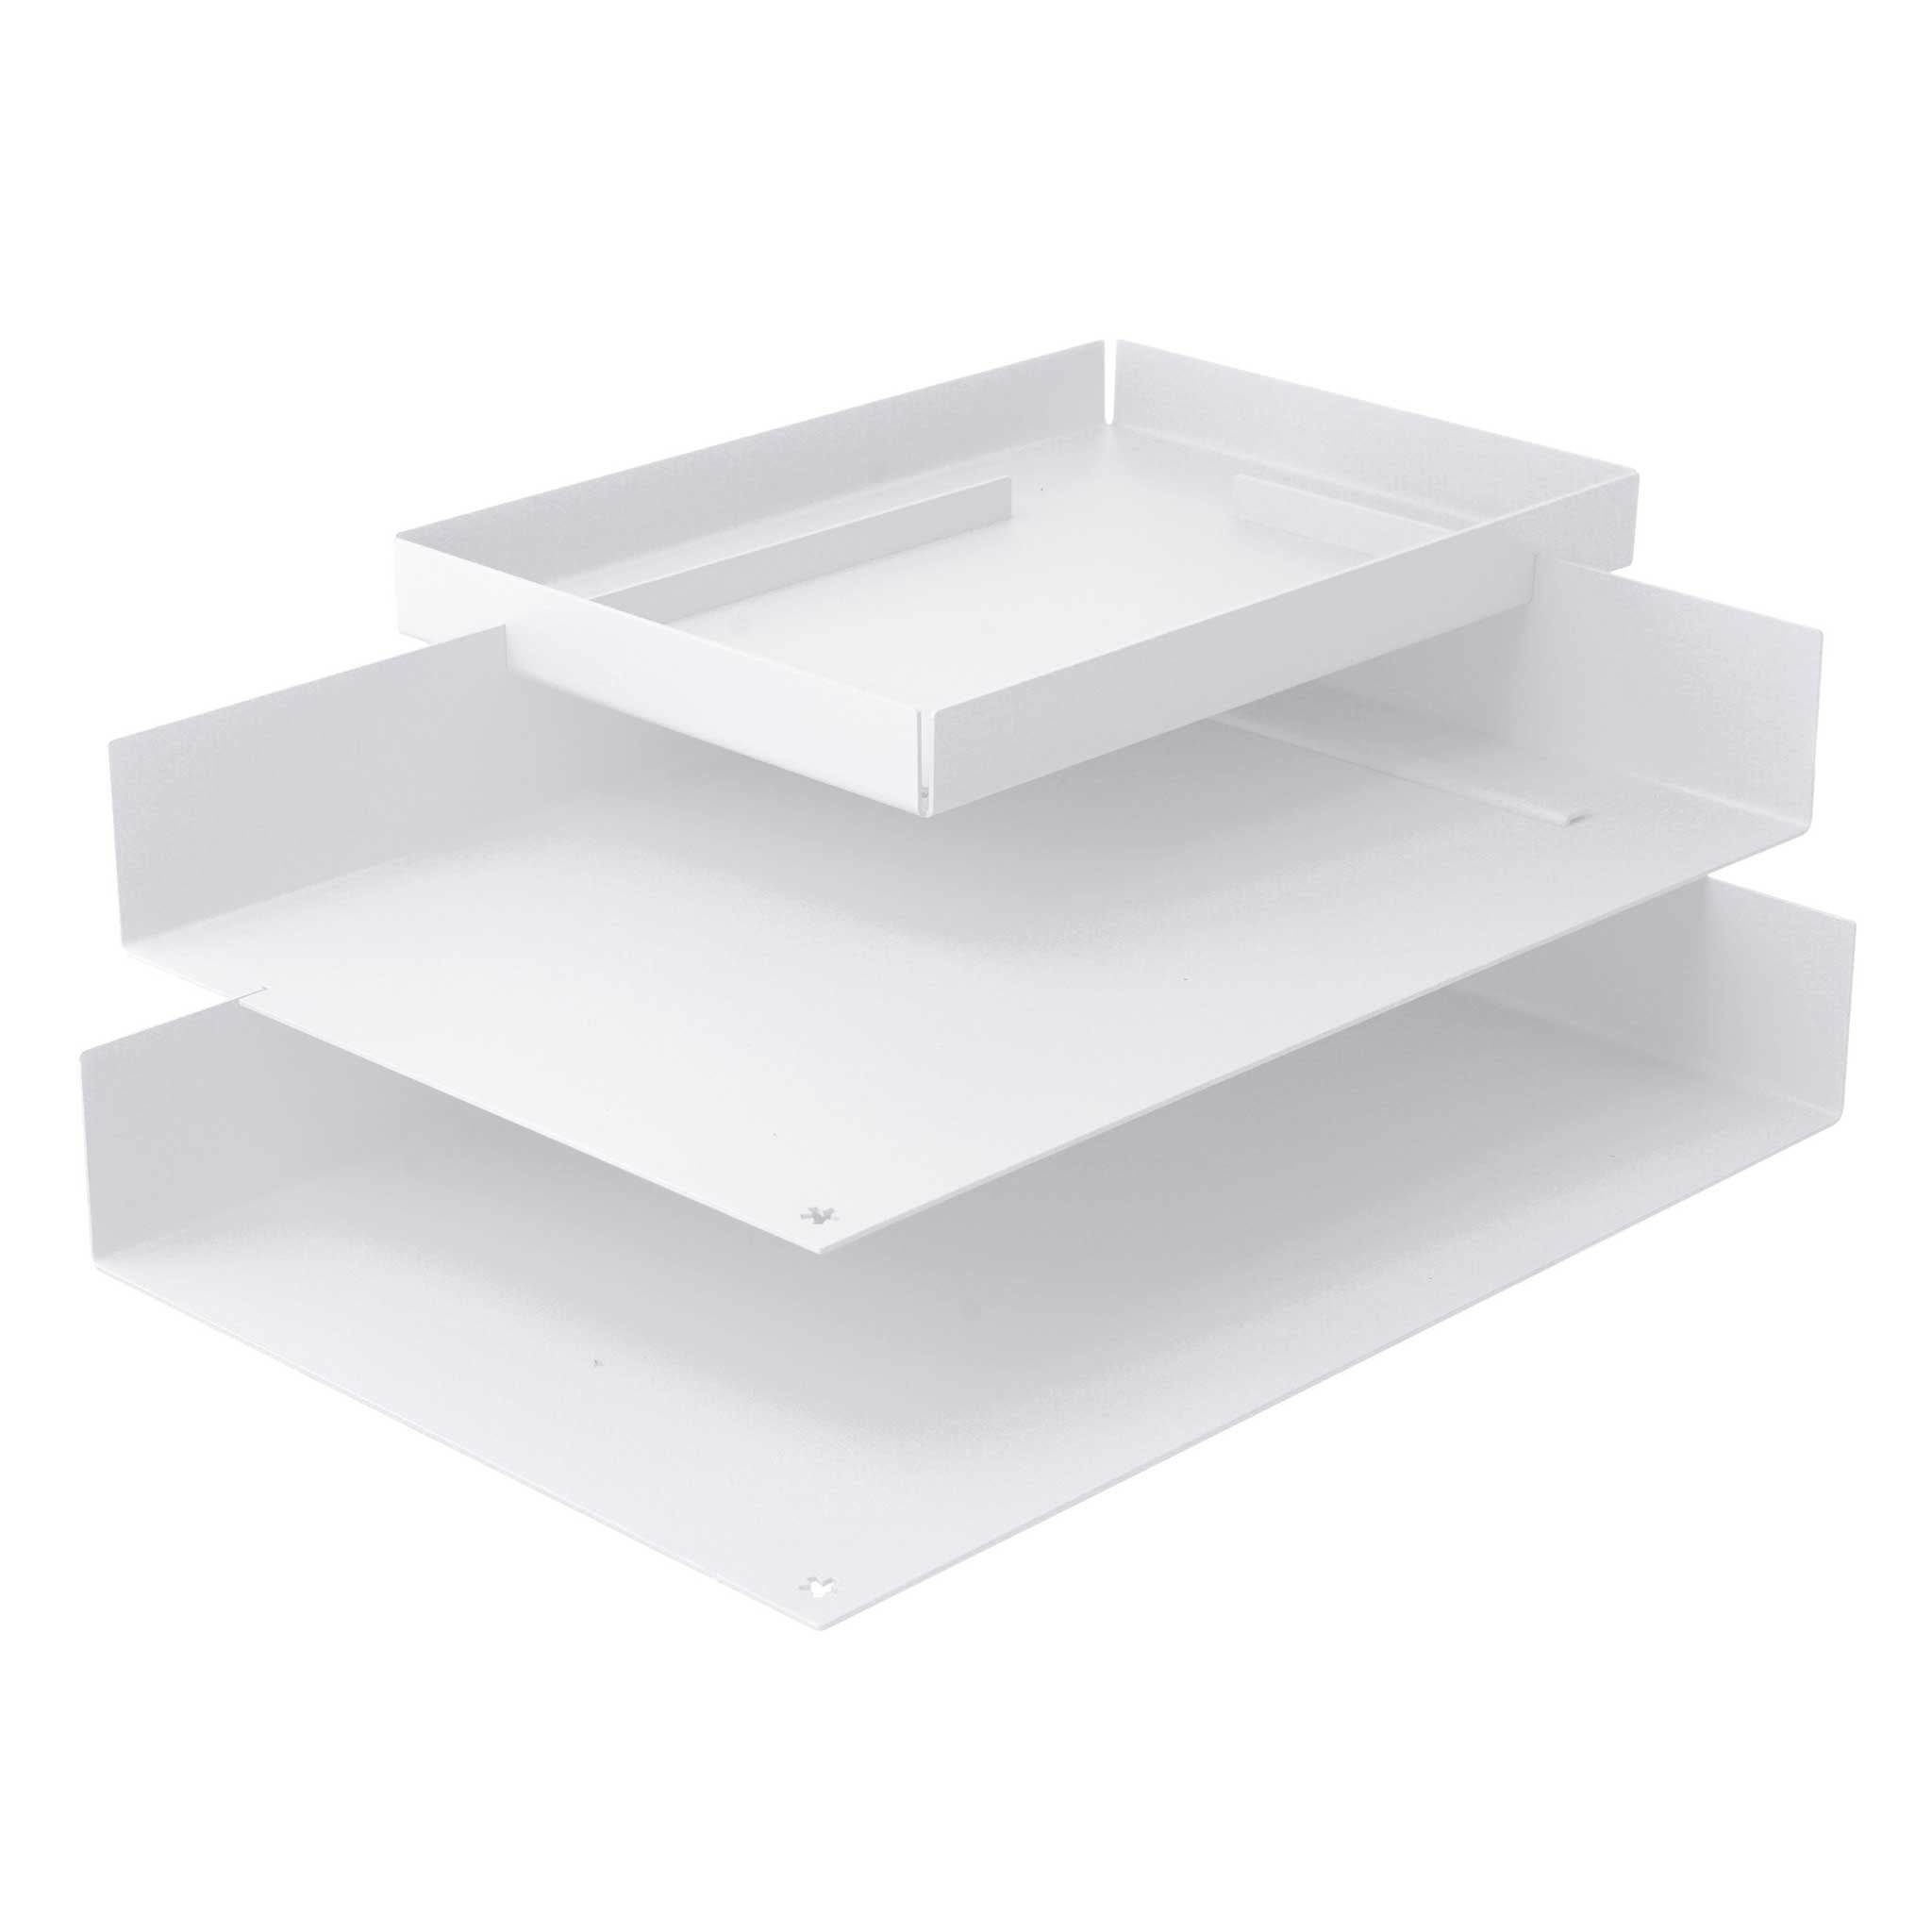 PAPER TRAY | PAPIERABLAGE | Roman Luyken | Peppermint Products - Charles & Marie